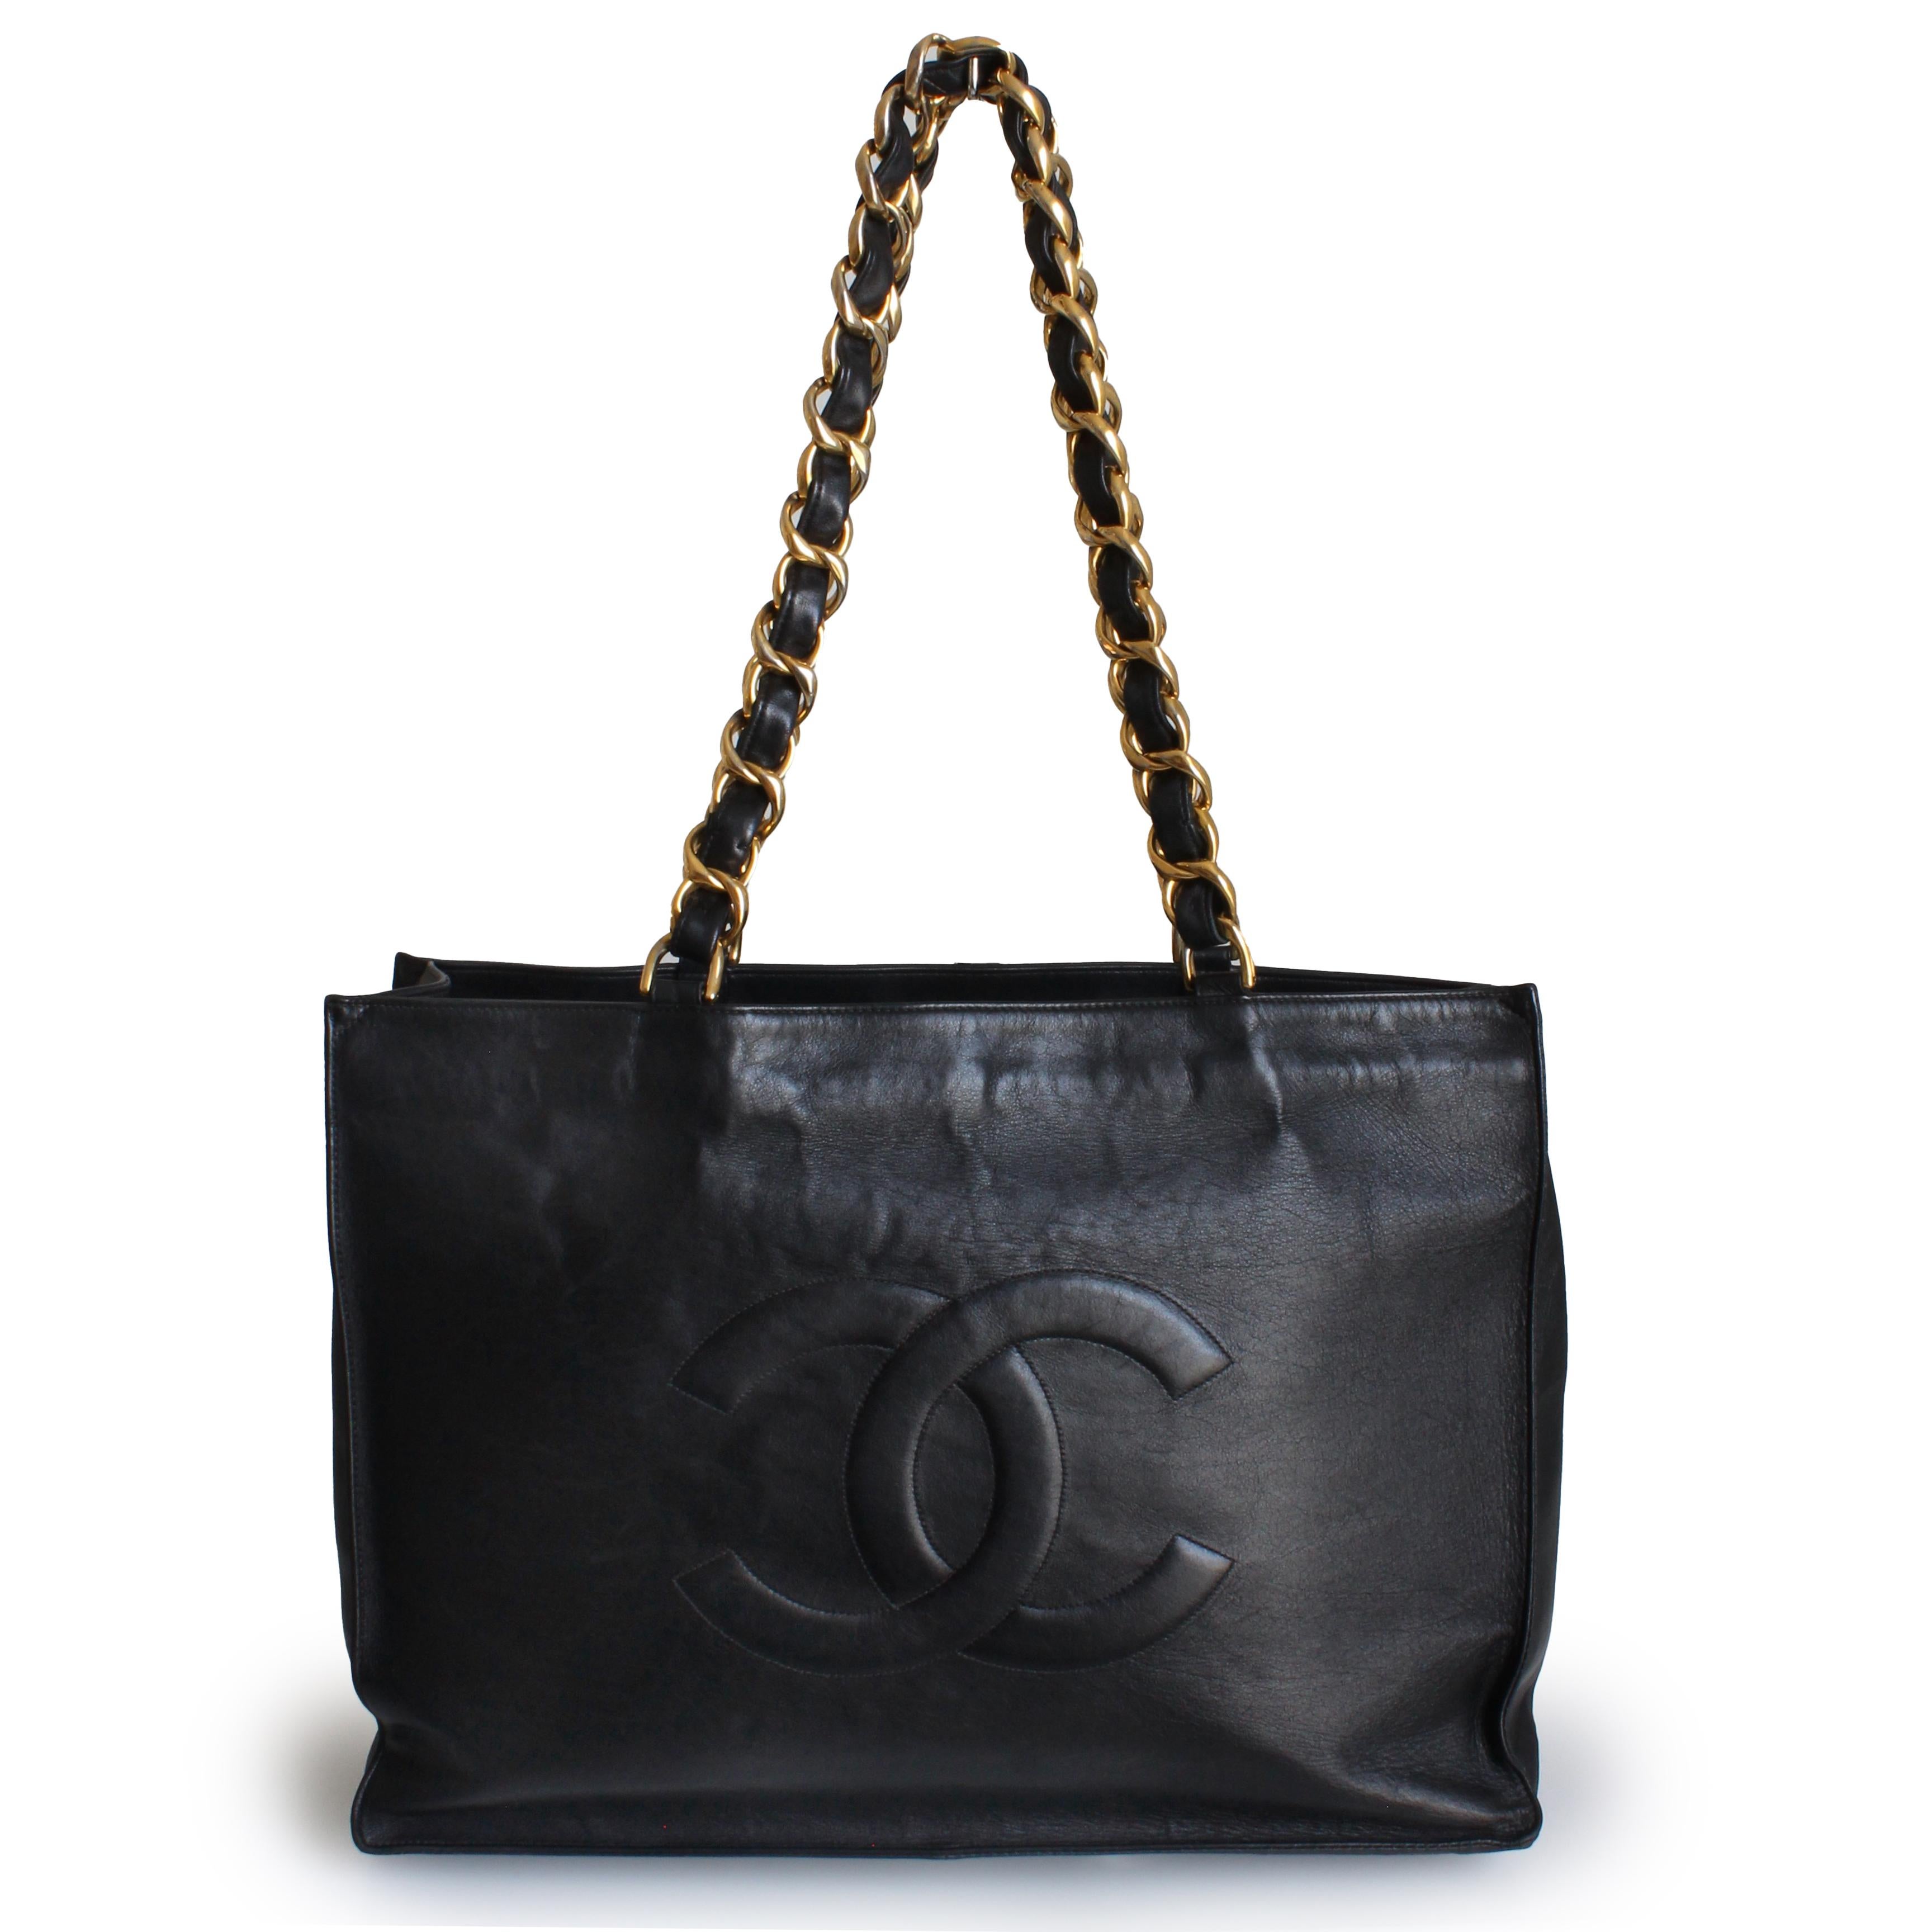 Authentic, preowned, vintage Chanel CC tote bag, likely made in the early 90s.  Made from black lambskin leather, it features an open top, Chanel's iconic CC logo stitched onto one side, chunky gold metal chain and leather straps and a cavernous